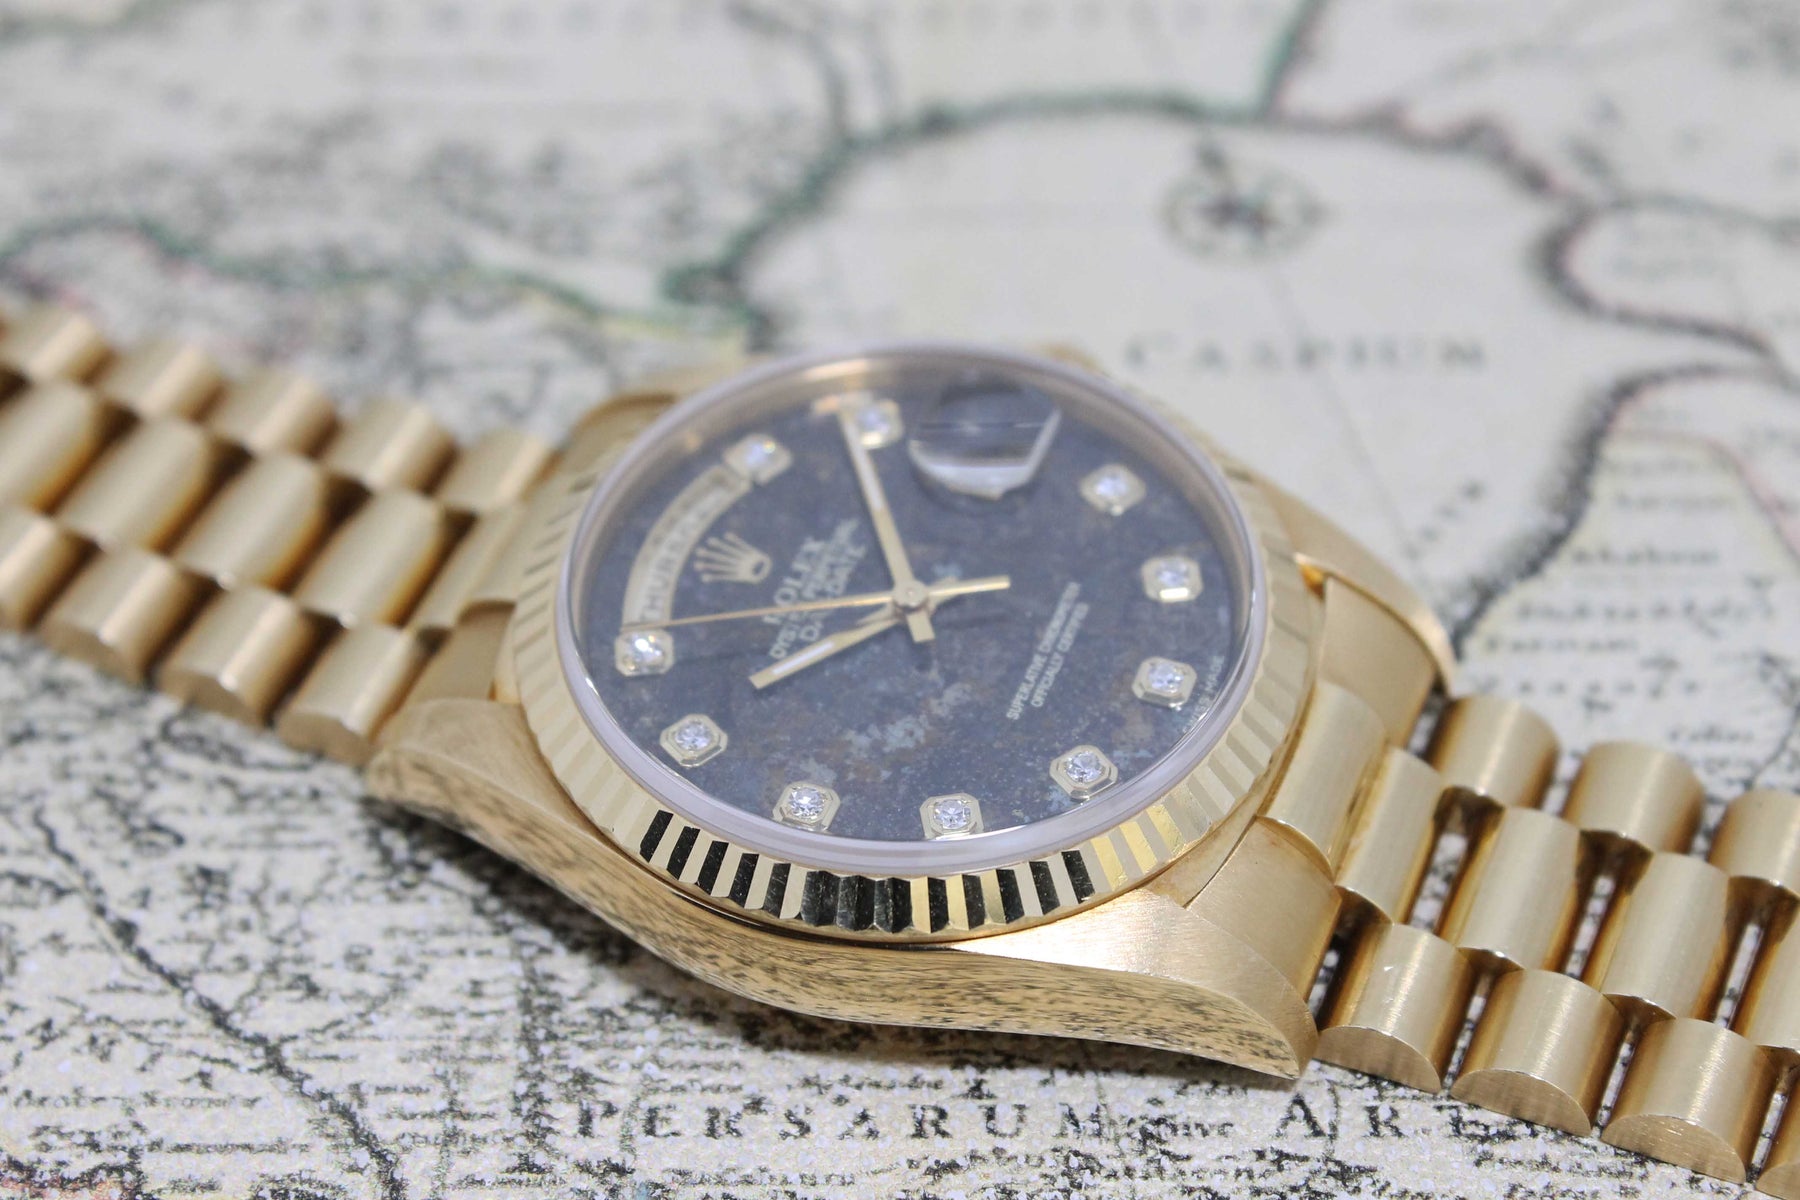 1991 Rolex Day Date Pyrite Diamond Dial Ref. 18238 (with Box & Papers)